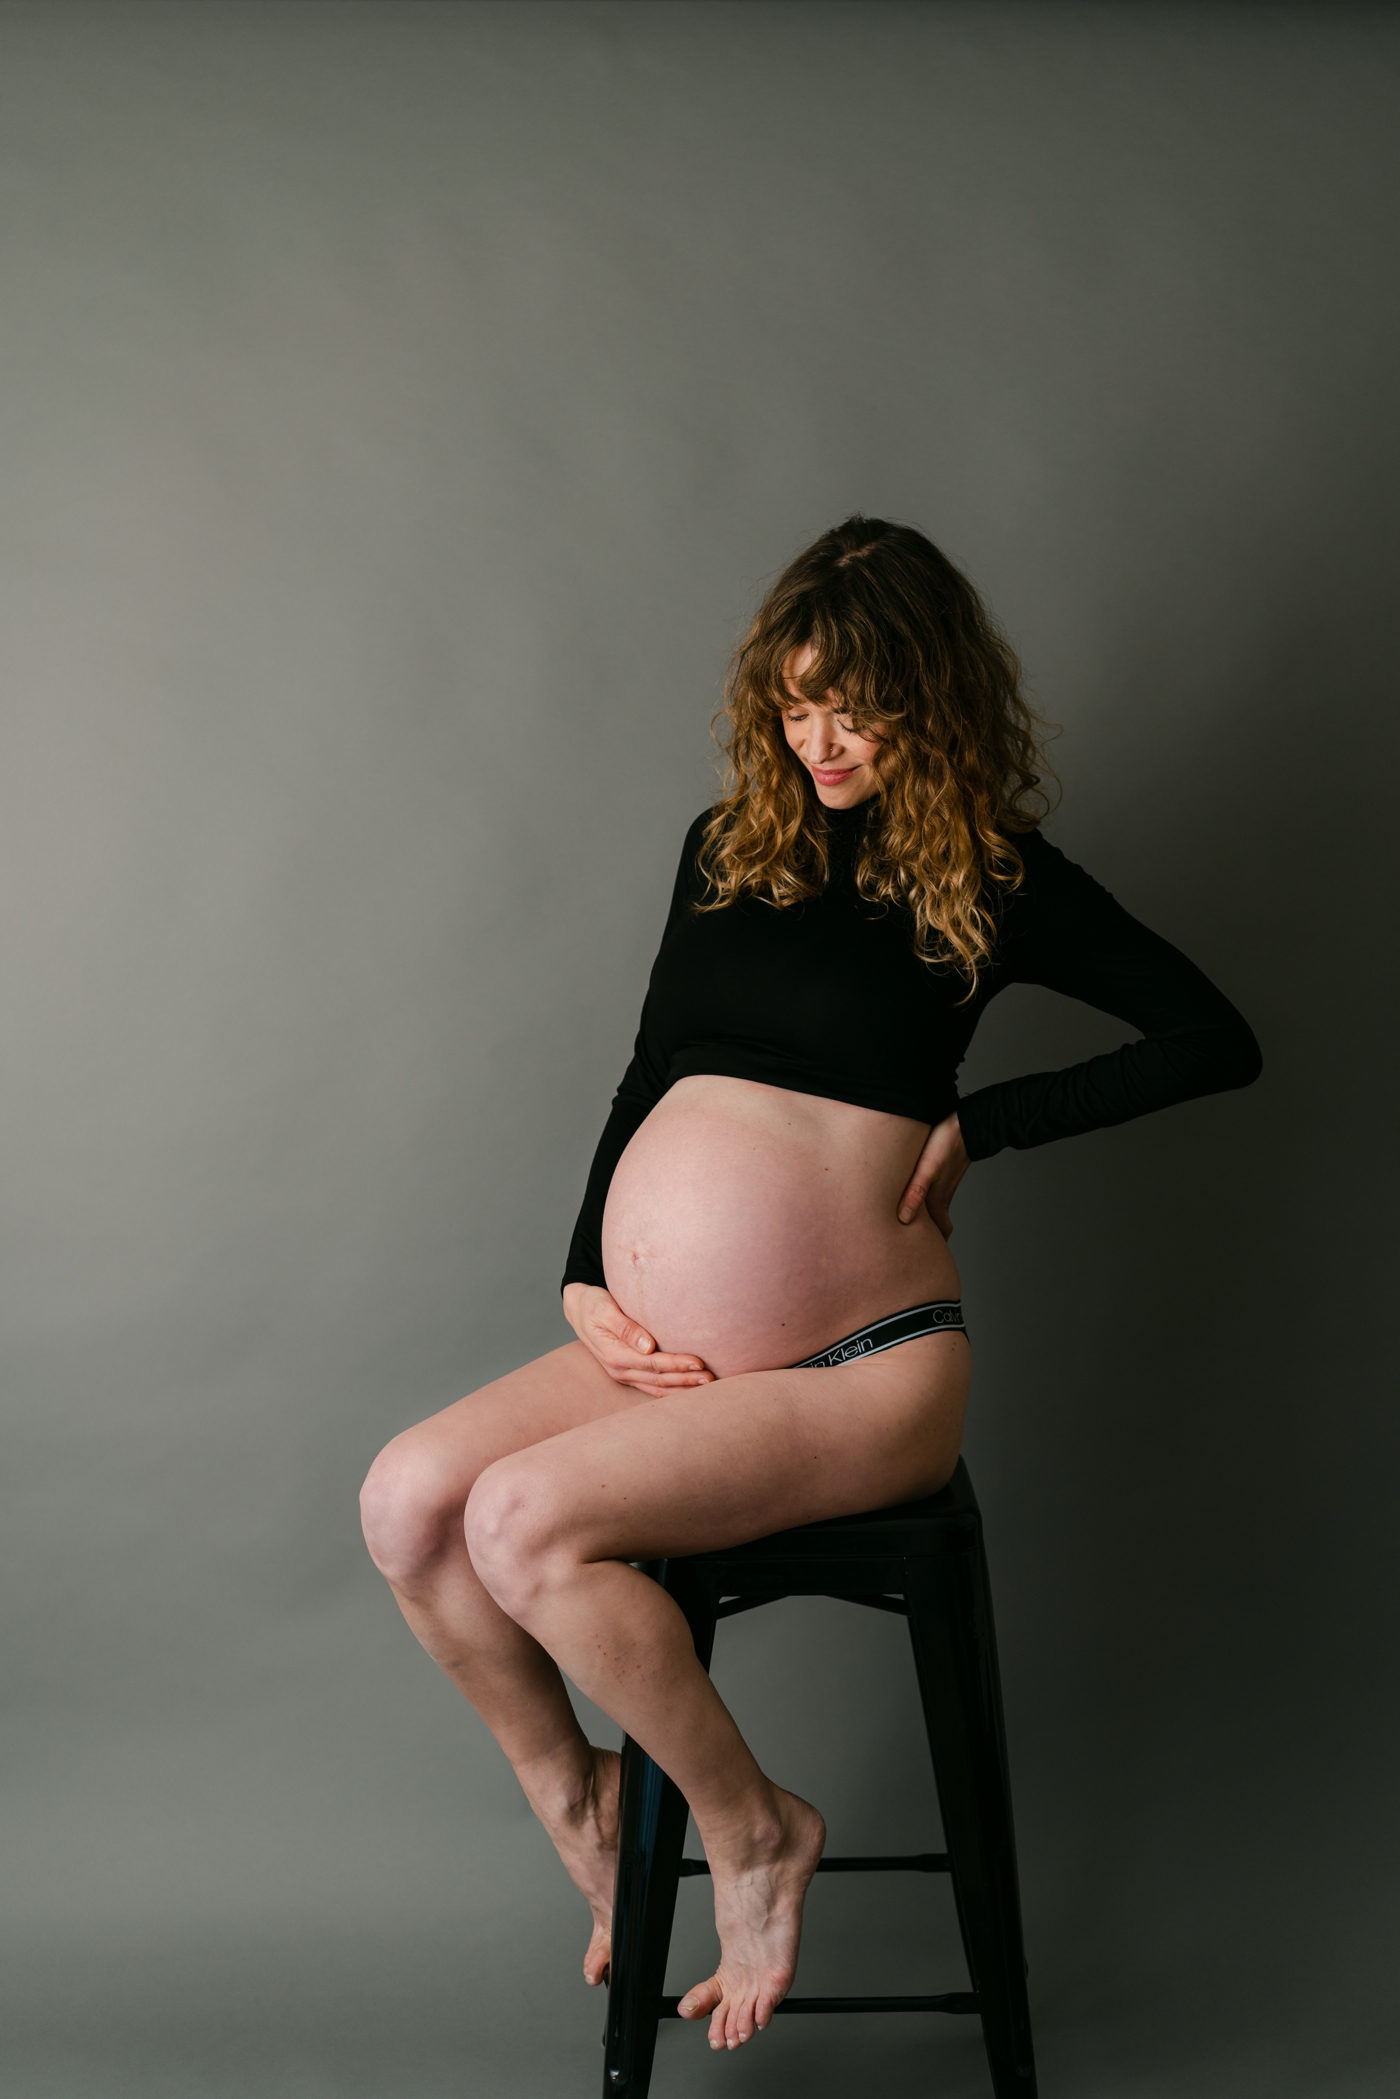 Mom sitting on stool looking at bump during Asheville, NC studio maternity session. Photo by Lauren Sosler Photography